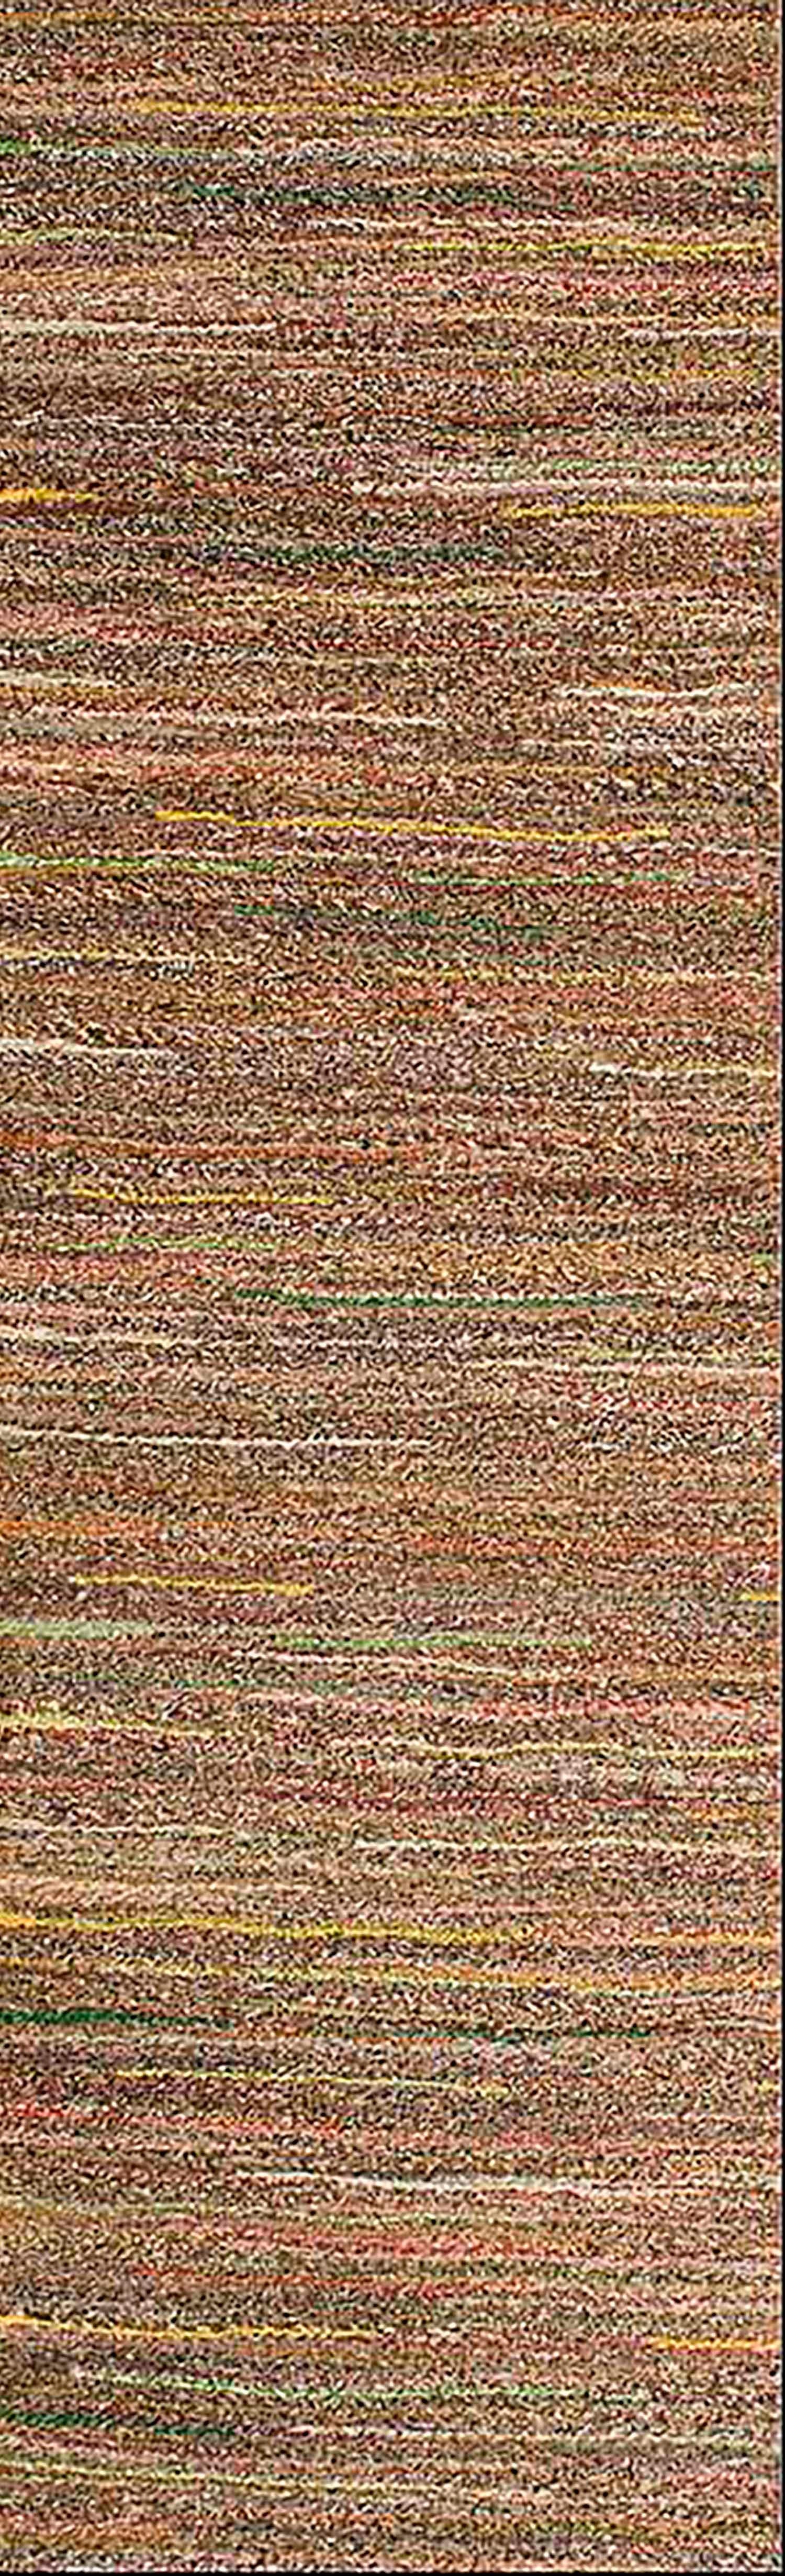 Early 20th Century American Shaker Pile Carpet ( 3' x 23'3" - 92 x 708 ) For Sale